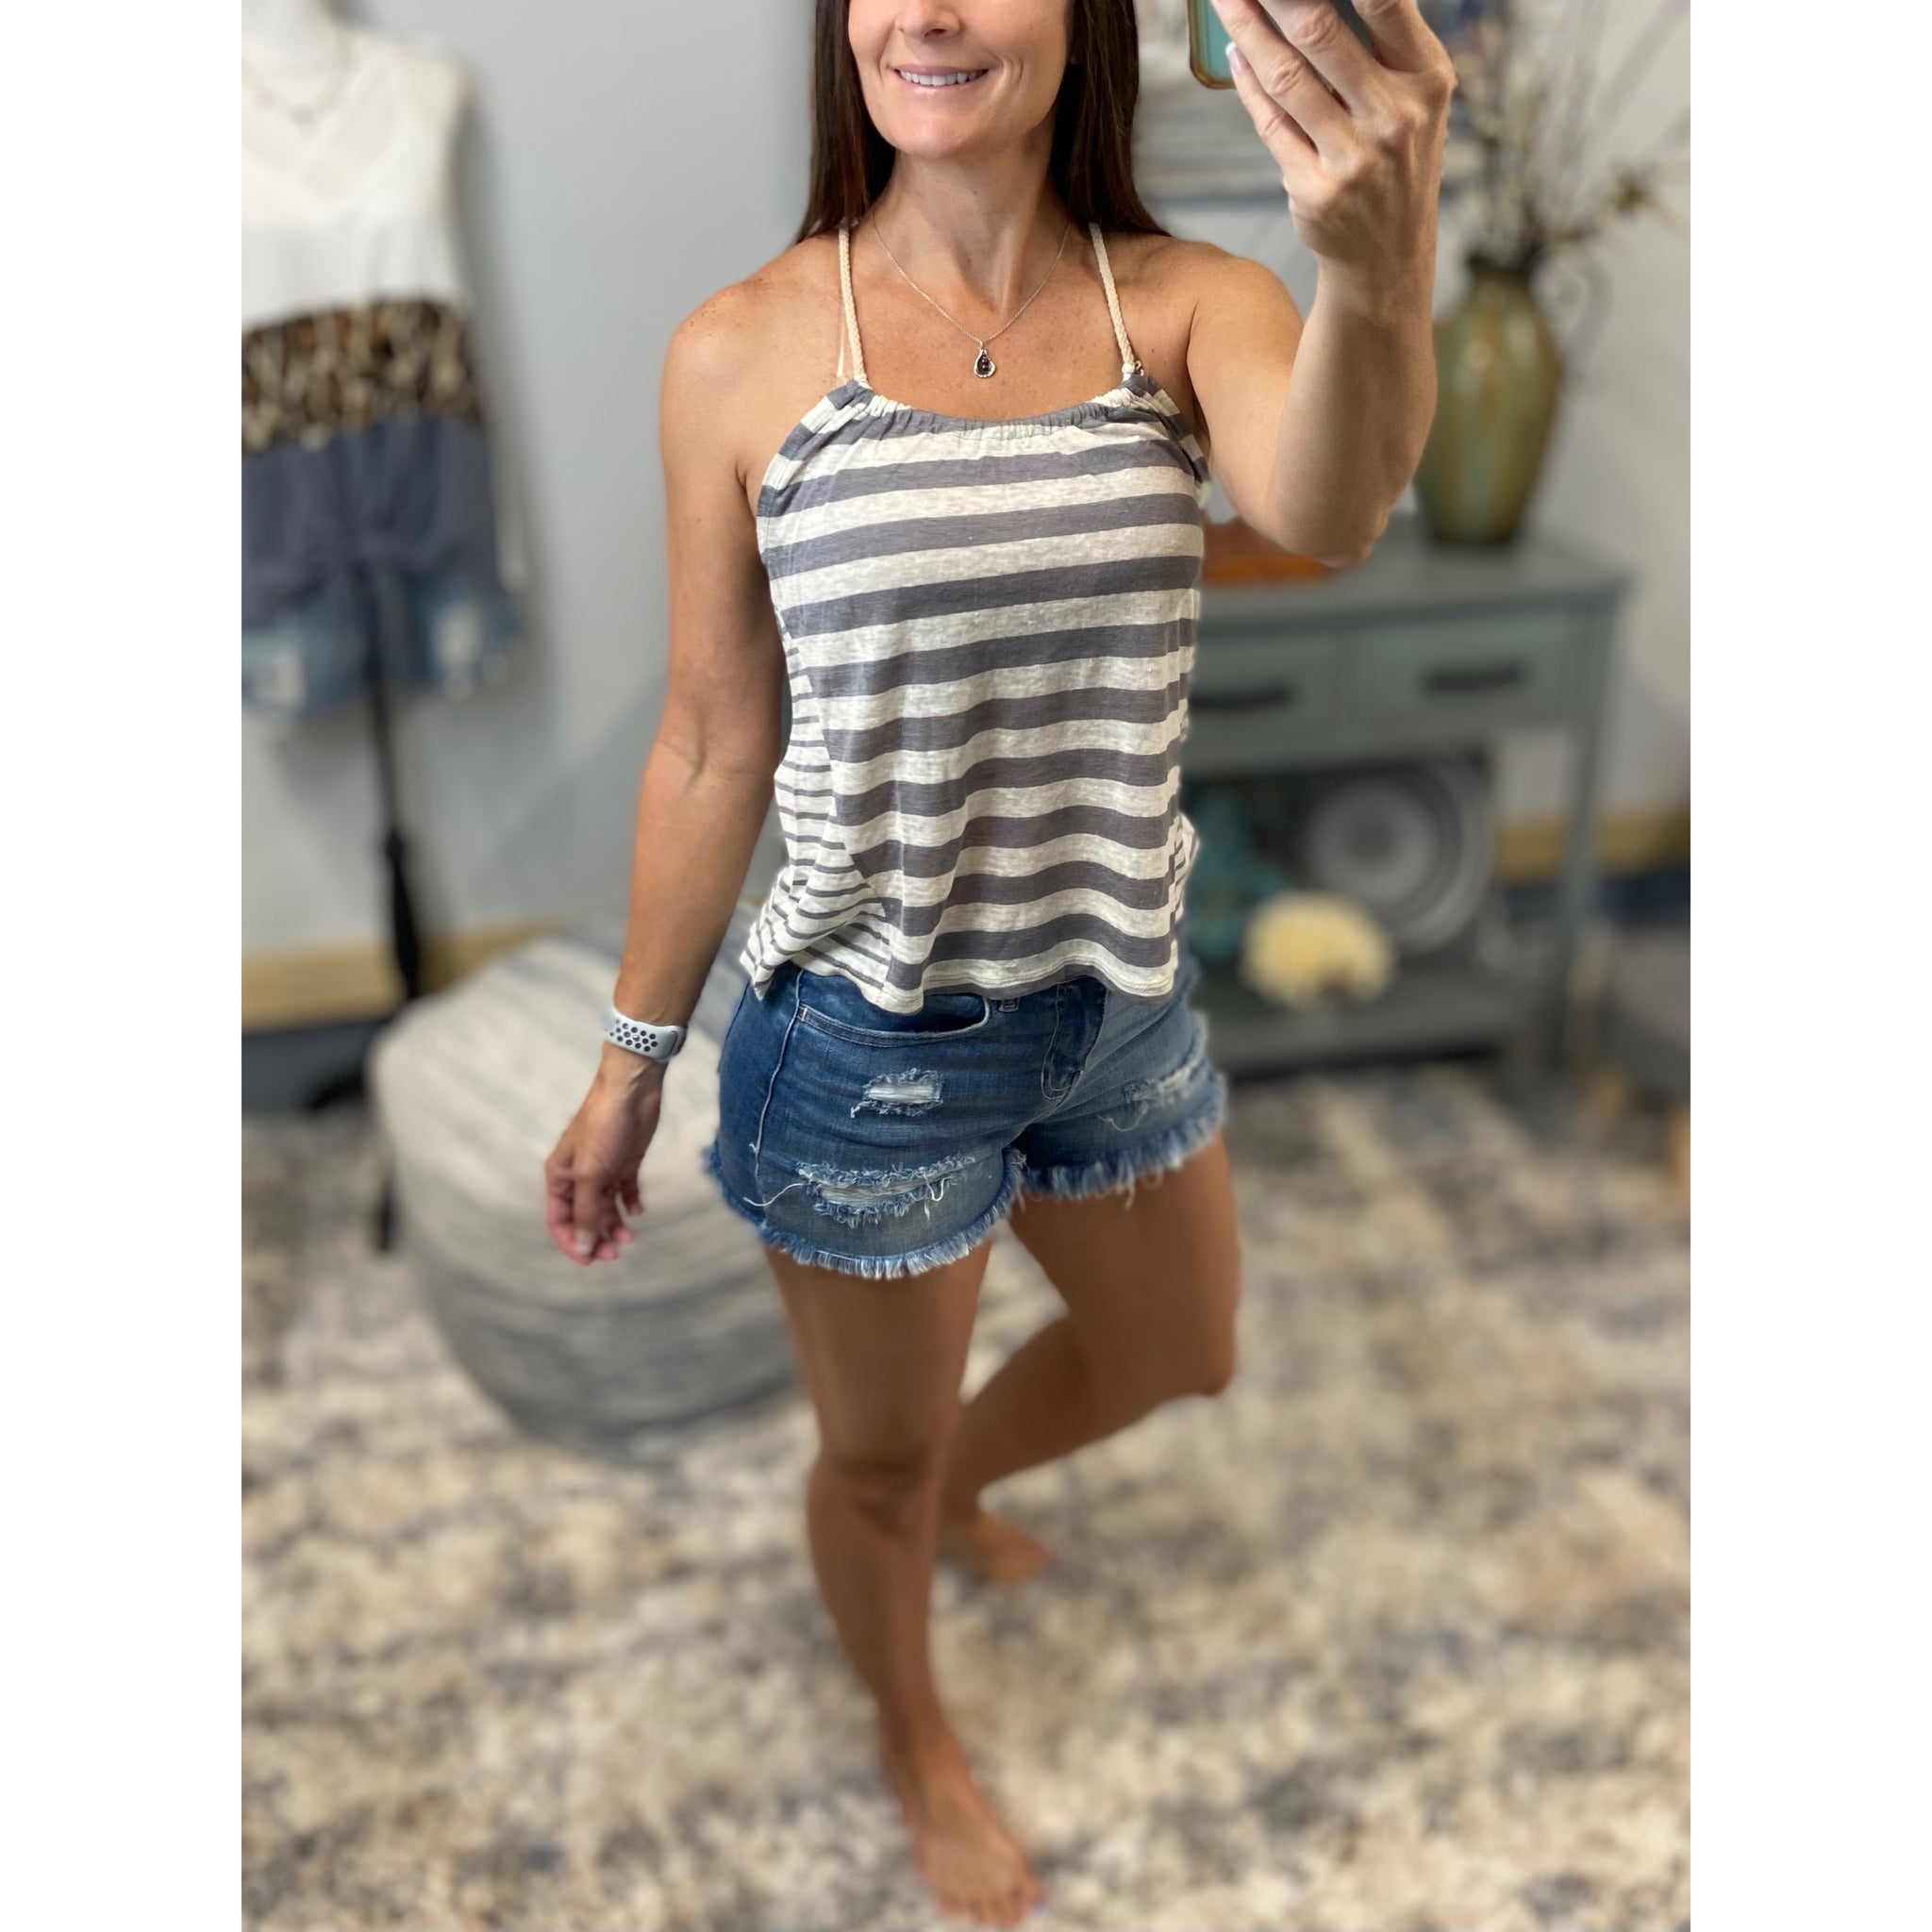 Very Sexy Scoop Neck Contrast Striped Flair Rope Spaghetti Strap Tank Top S/M/L